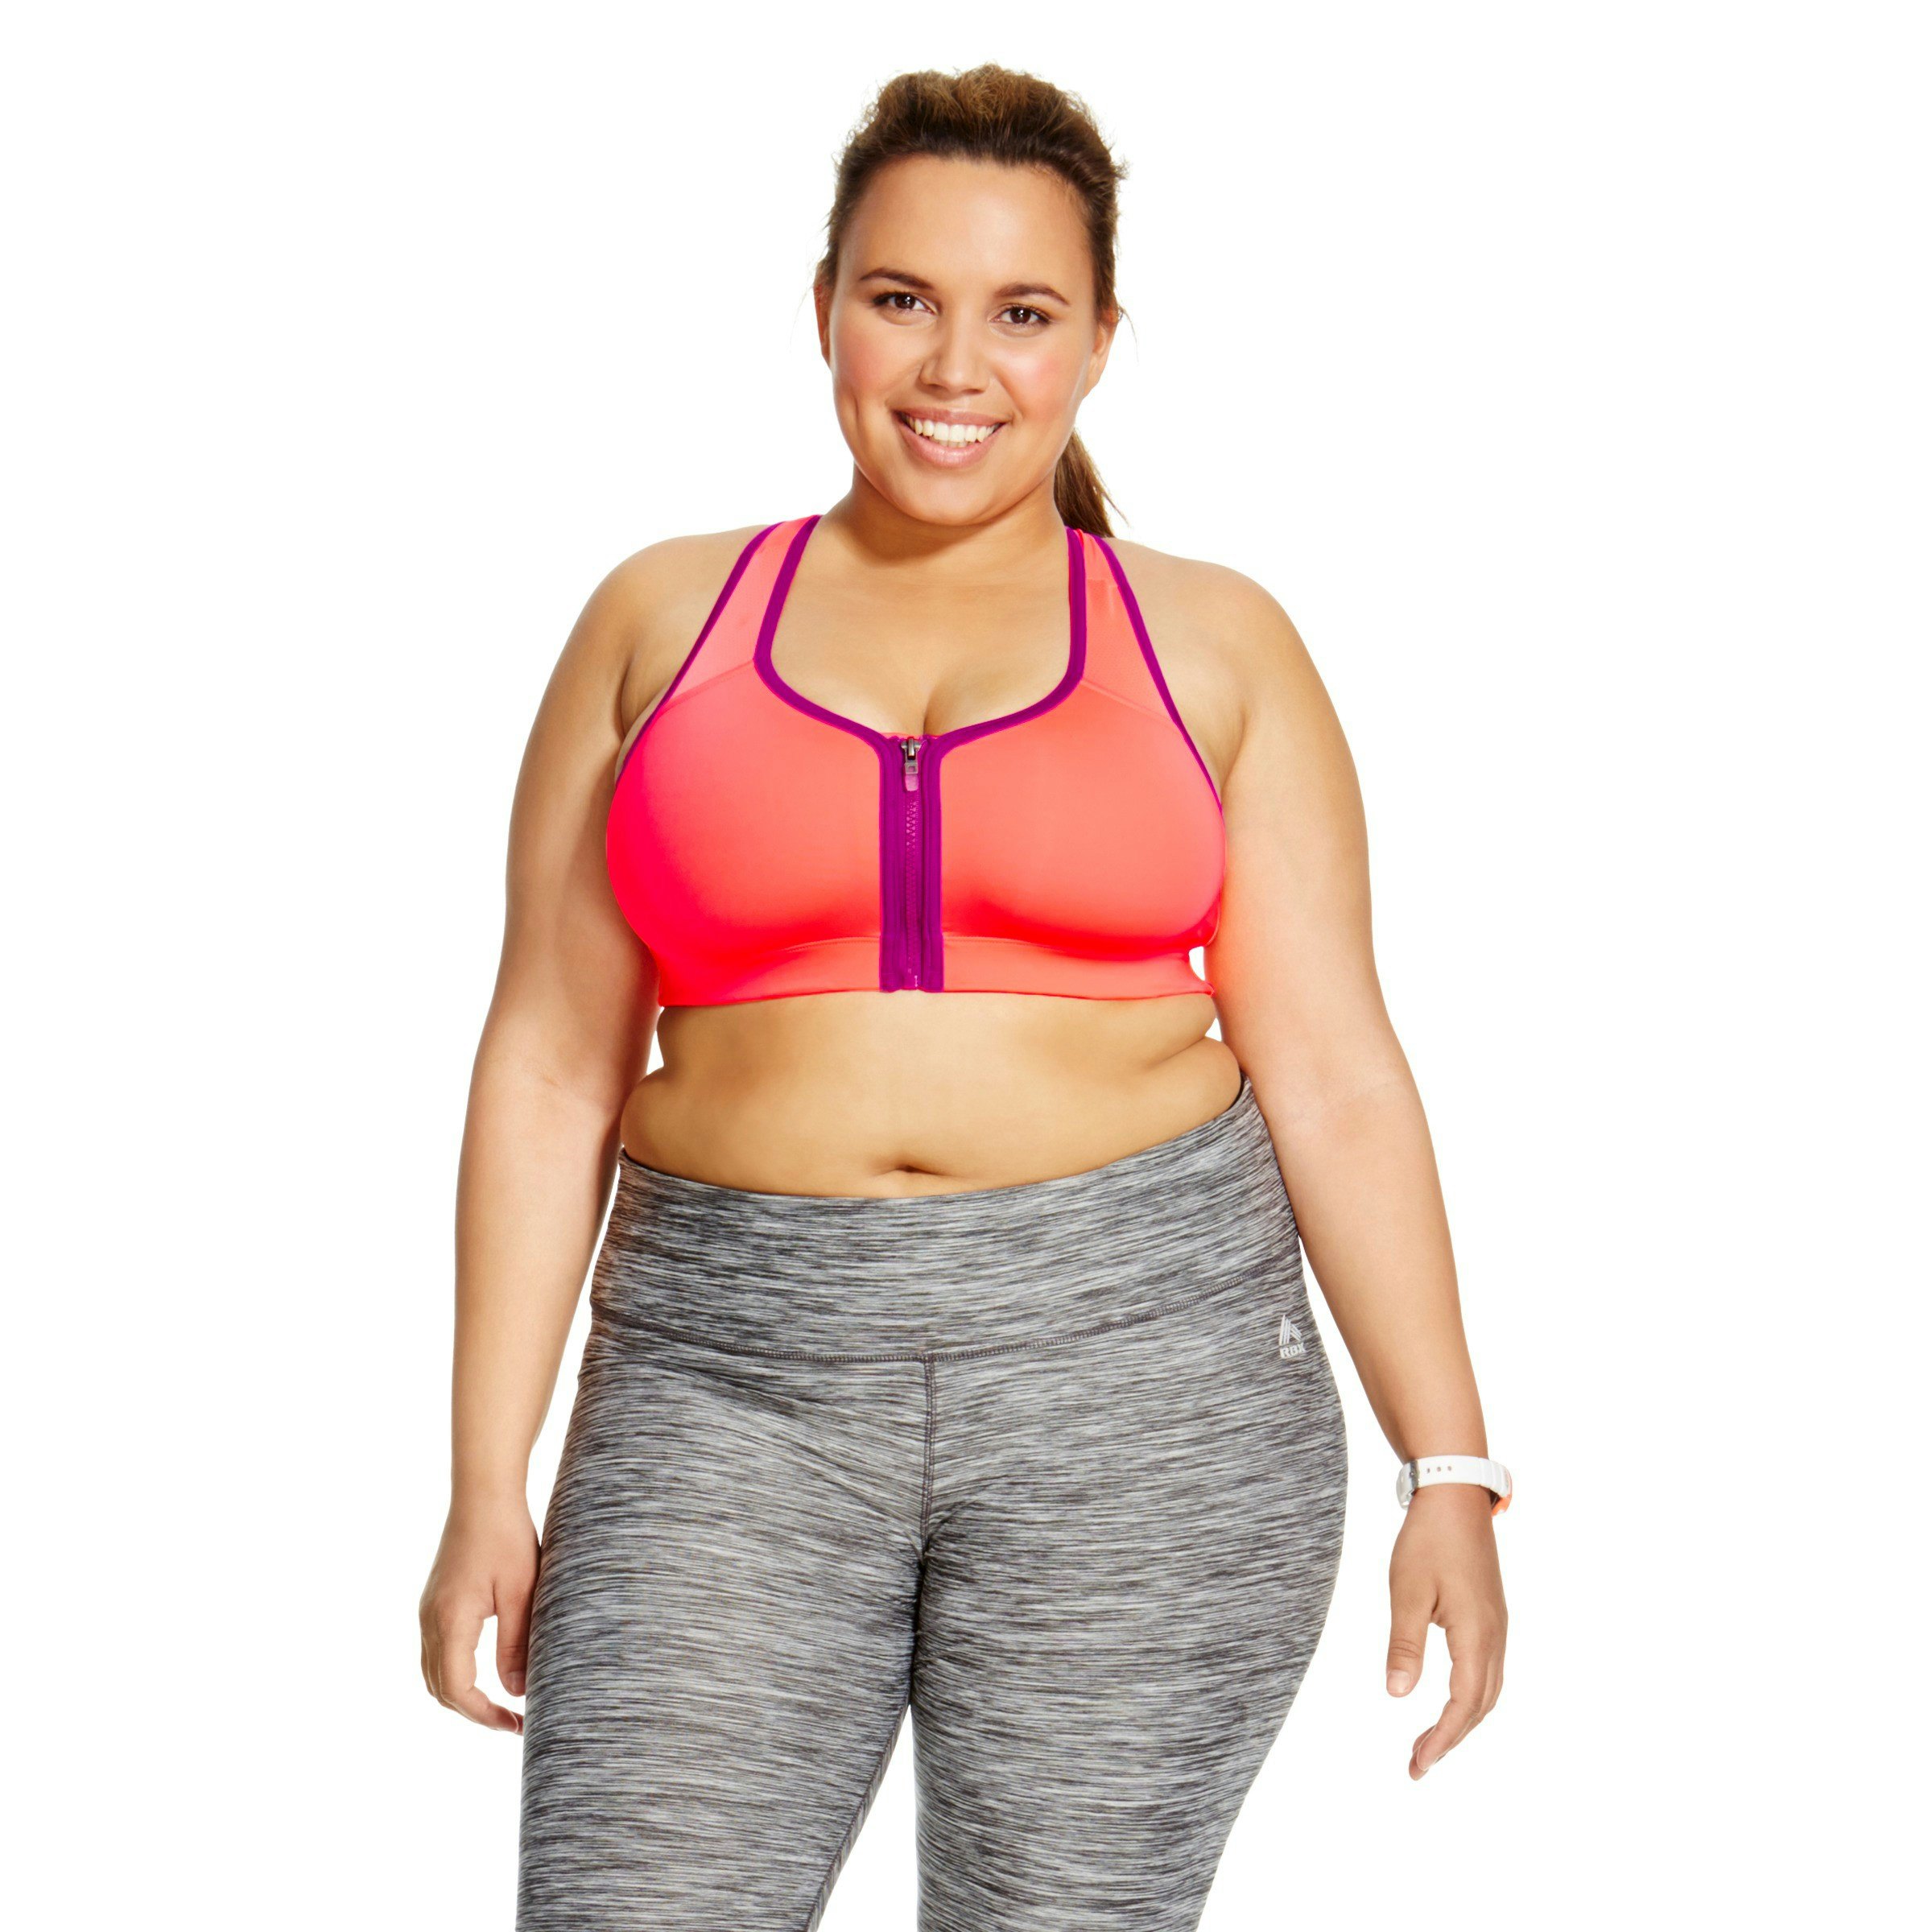 15 Cute Plus Size Sports Bras That Won't Make Working Out A